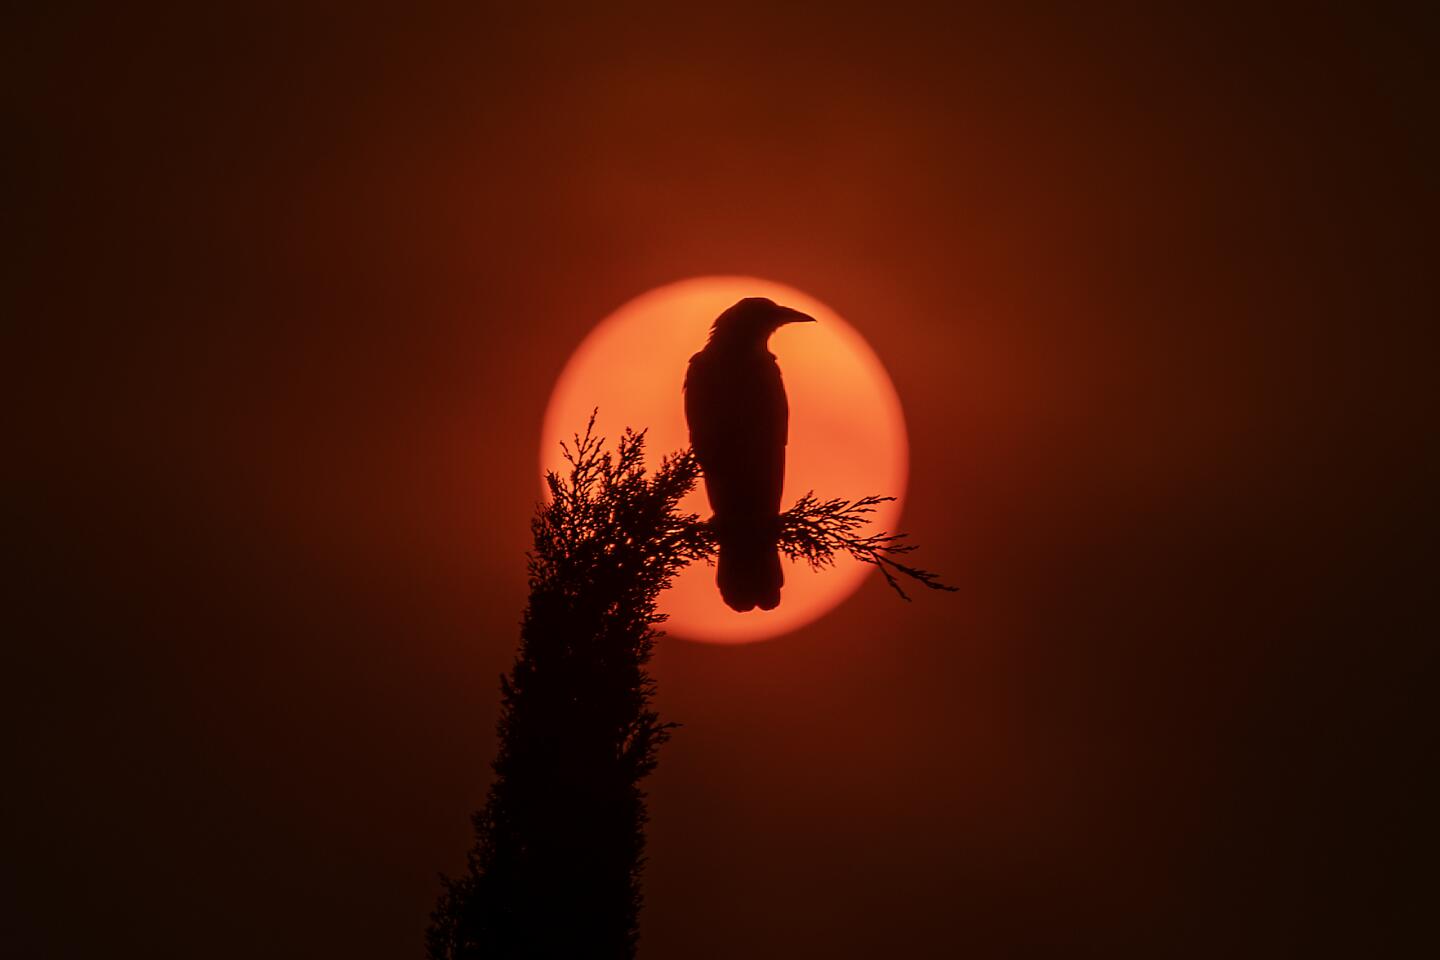 A crow on a cypress tree is silhouetted by a hazy sun.